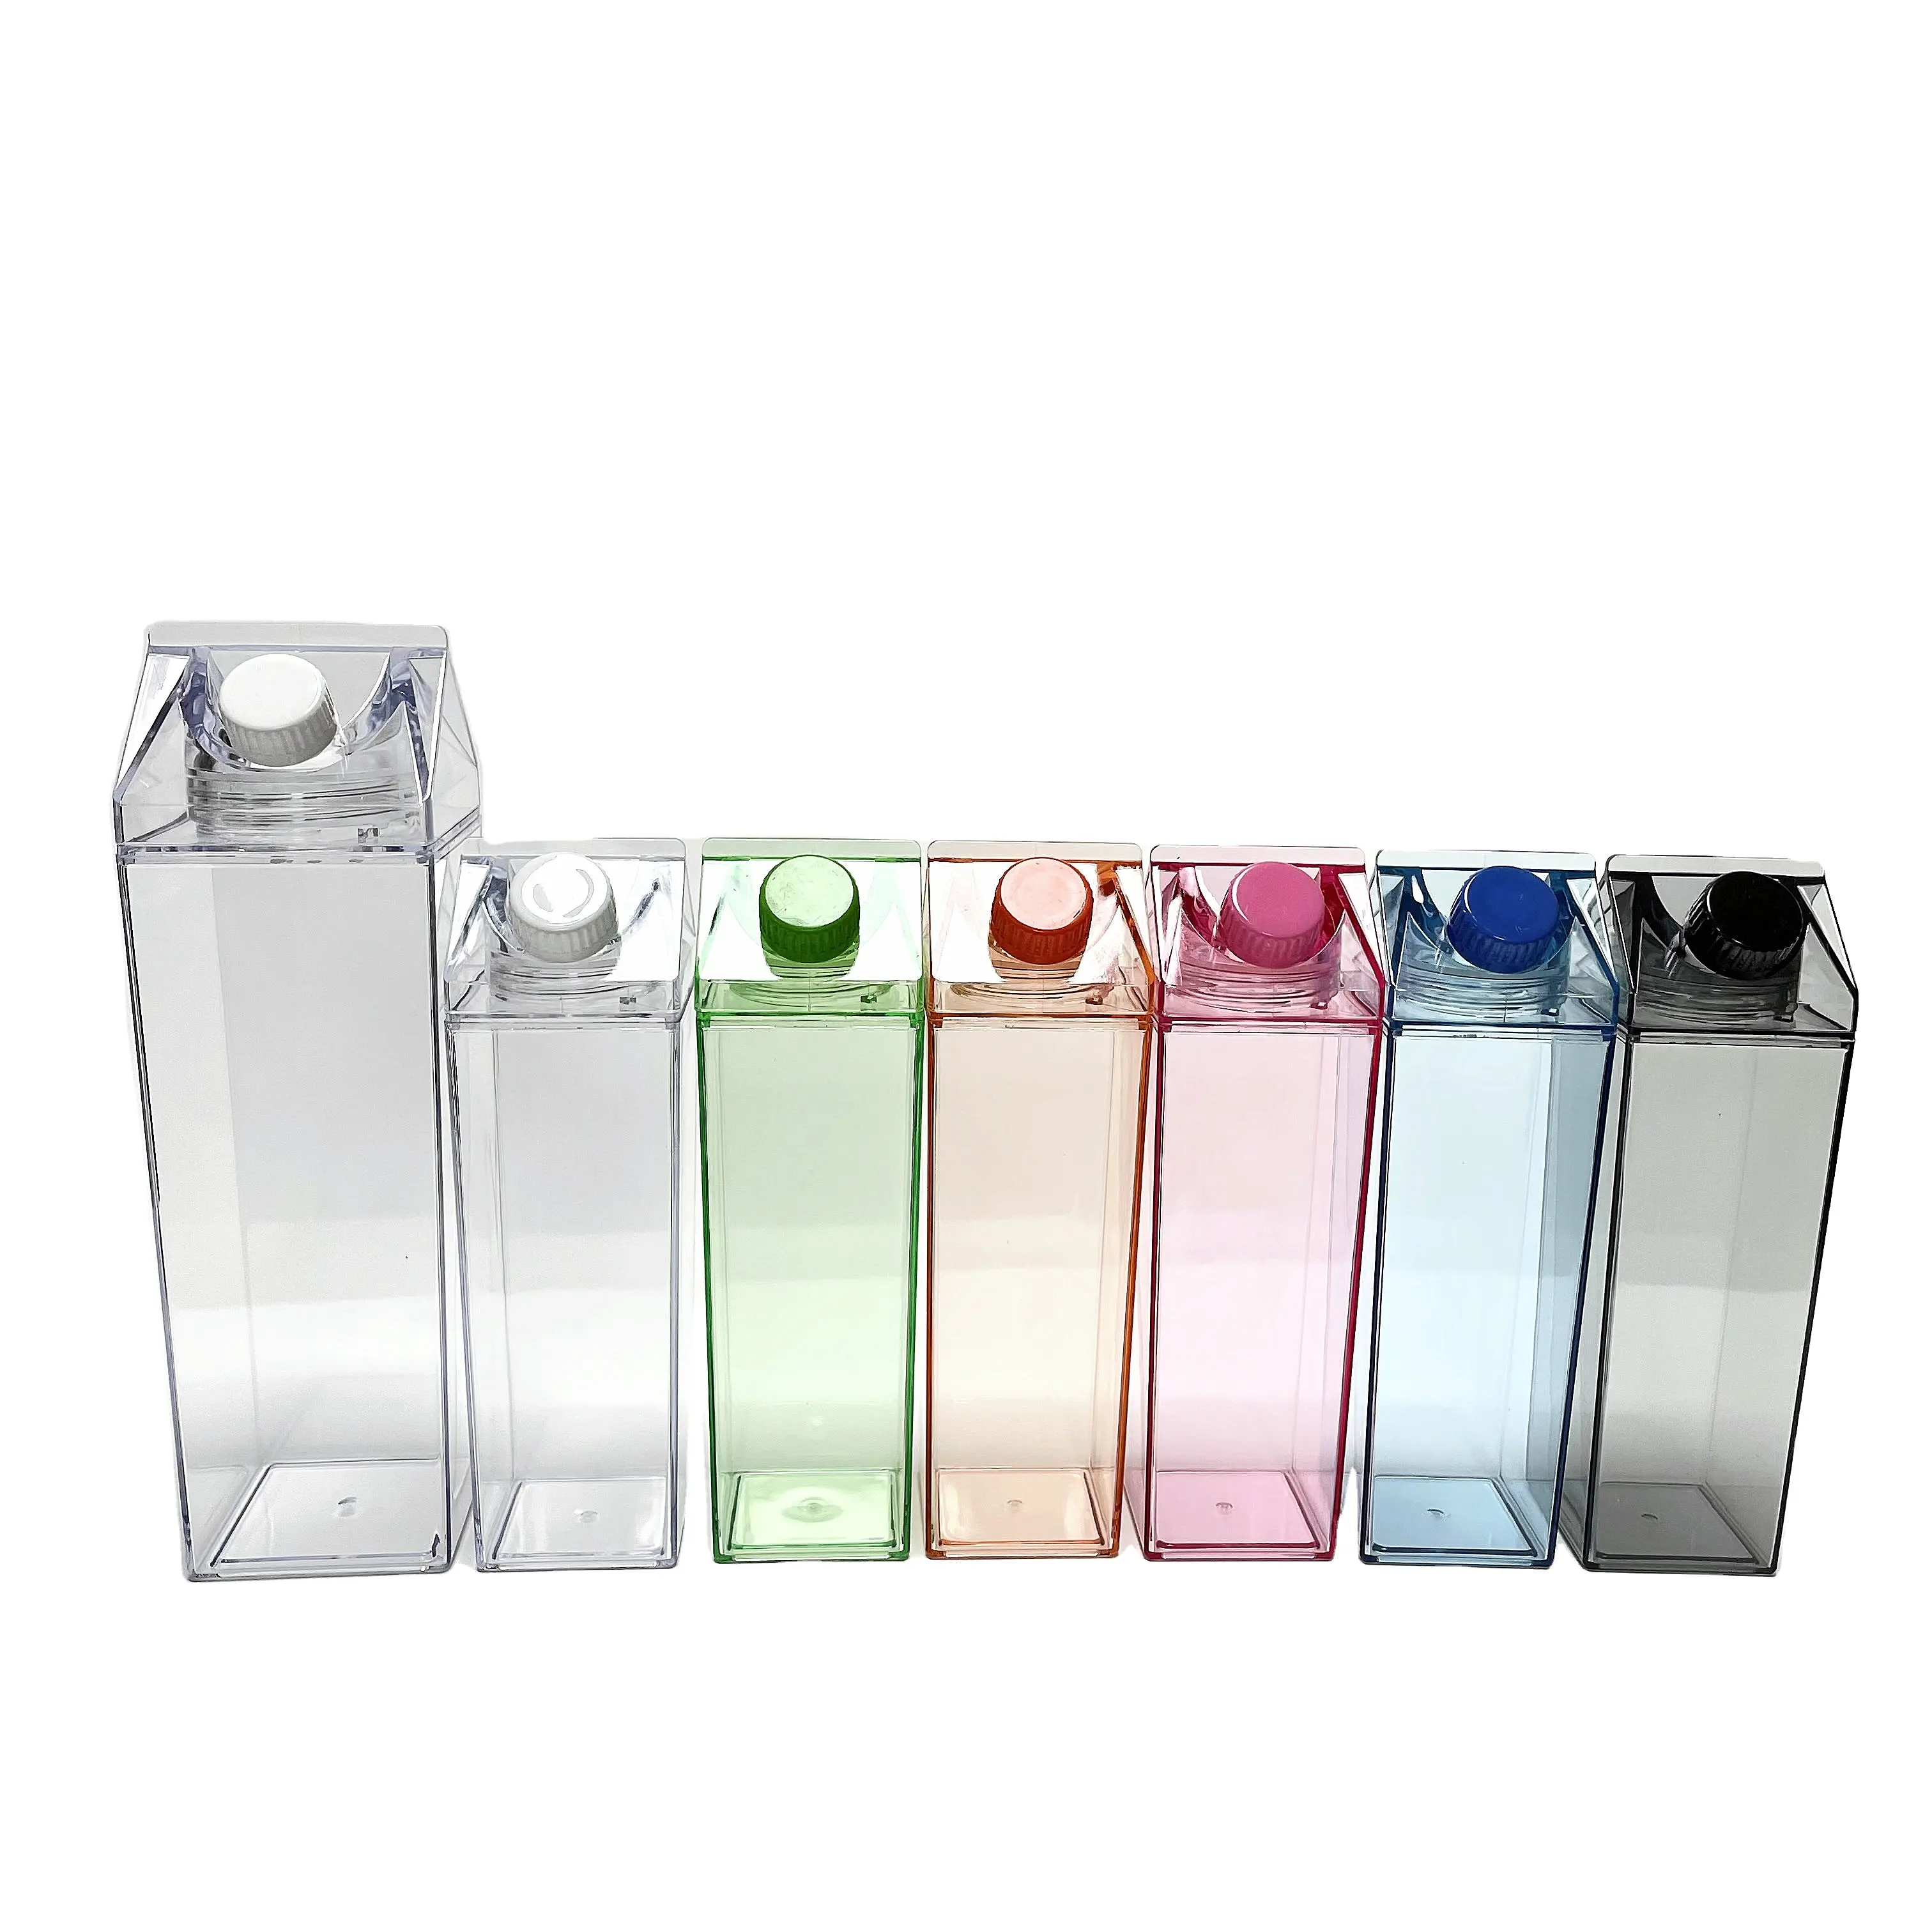 BPA free Leakproof Milk Carton Shaped Clear acrylic plastic 500ml 1000ml Portable Square Milk Water Bottle with screw lid